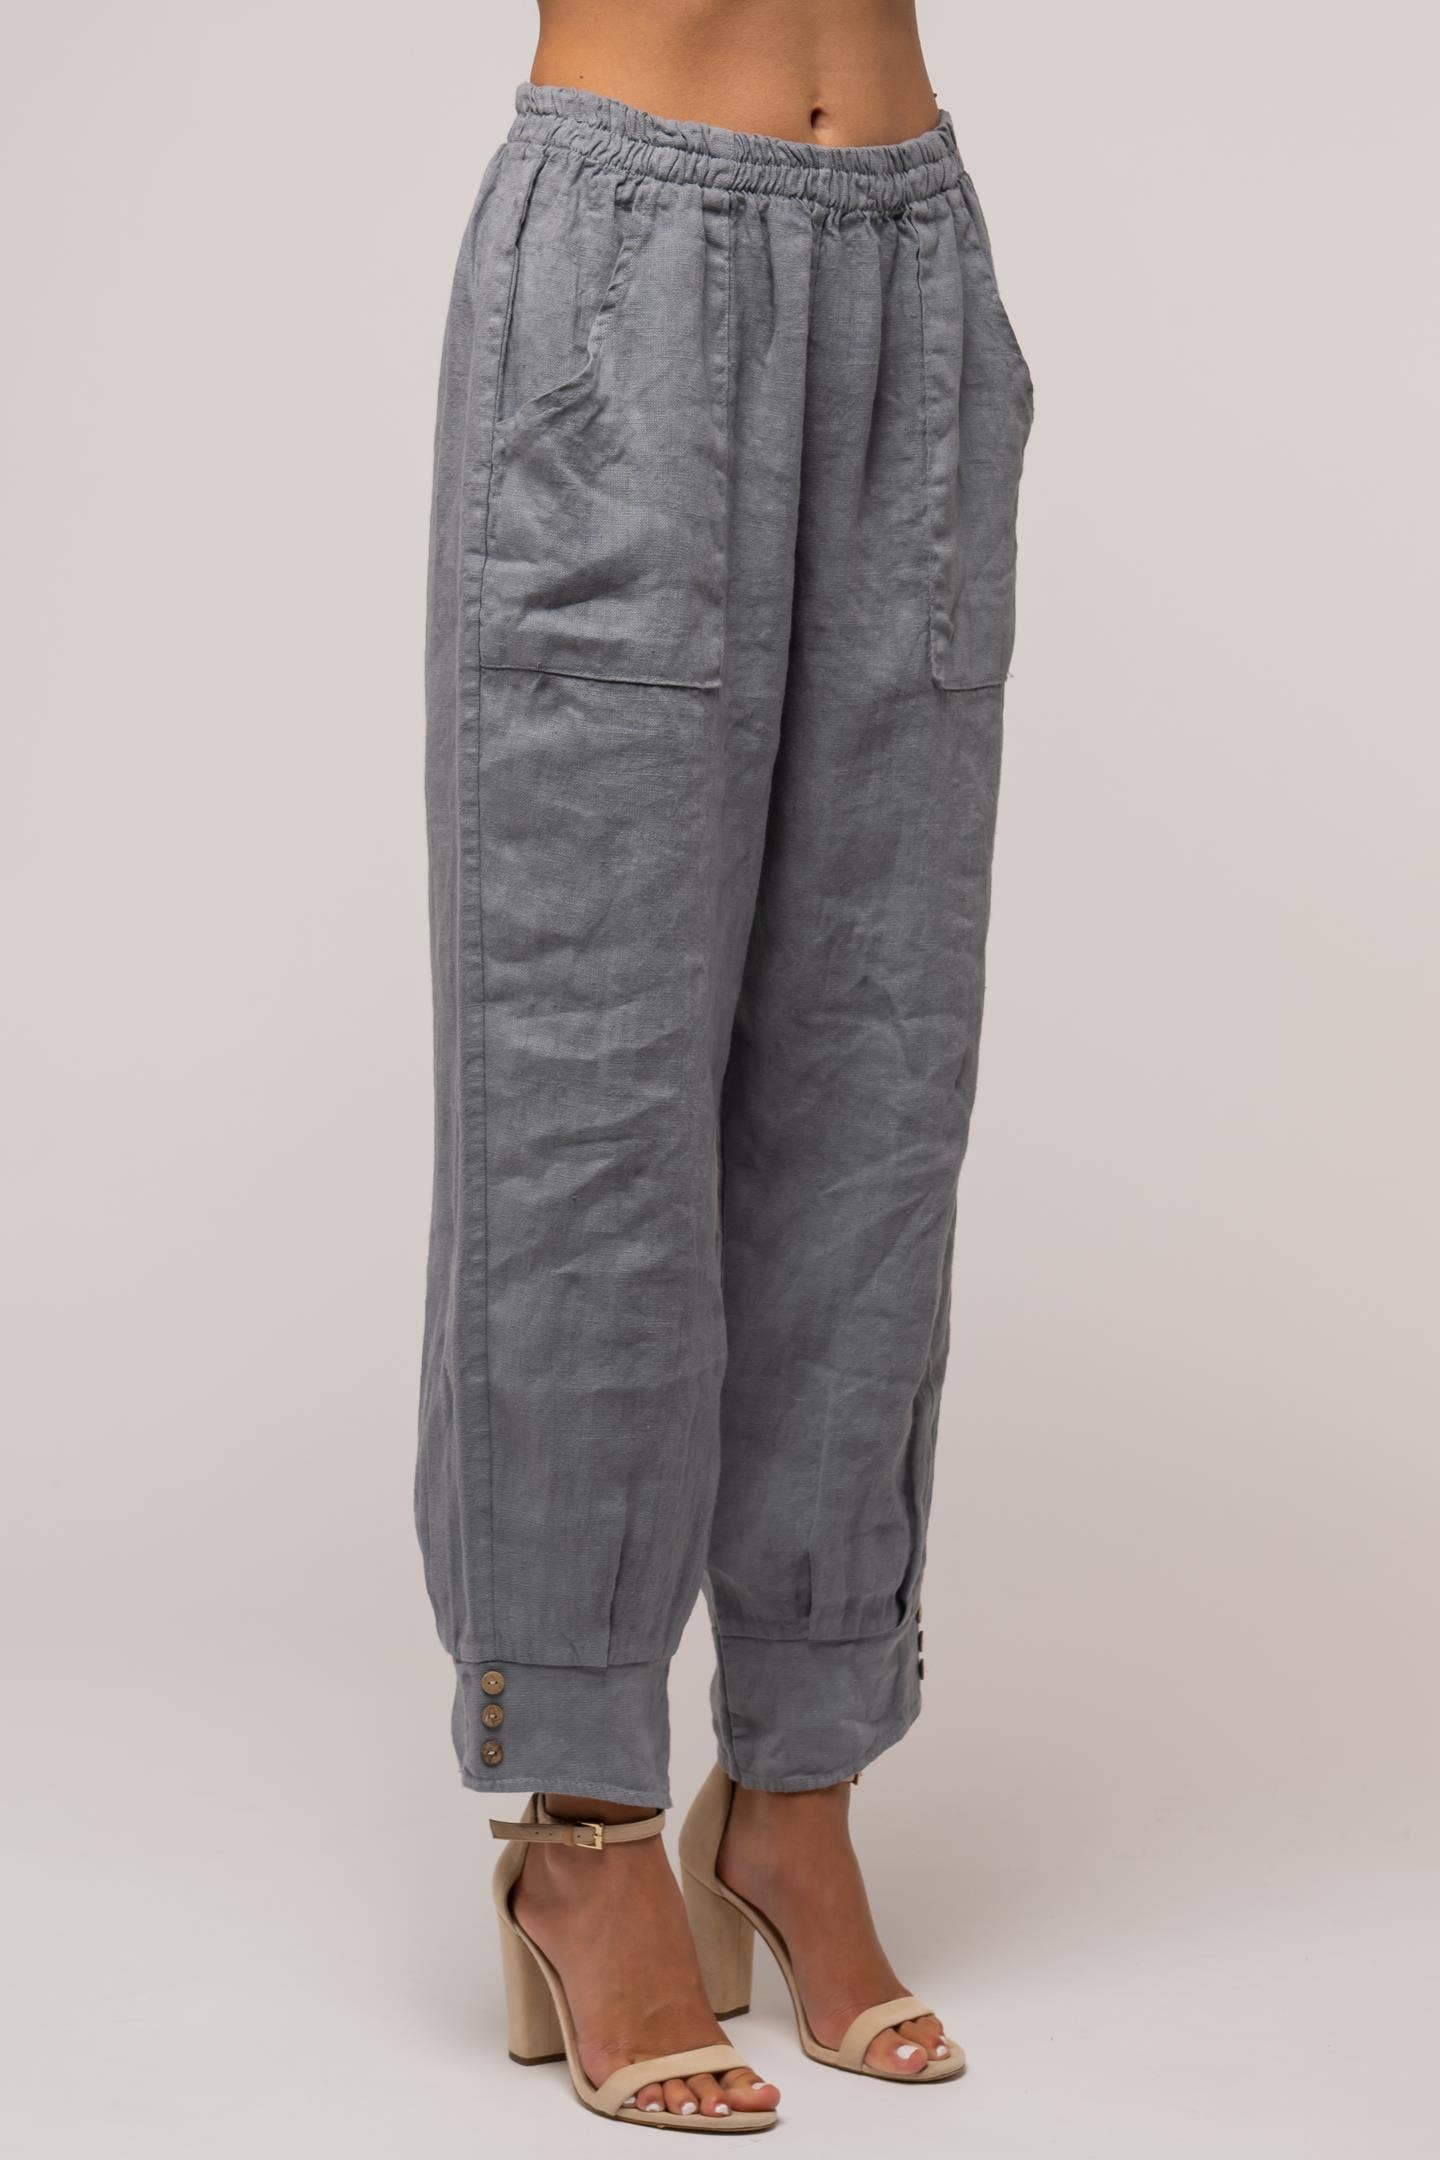 LINEN LUV -Grigio French Linen Pant